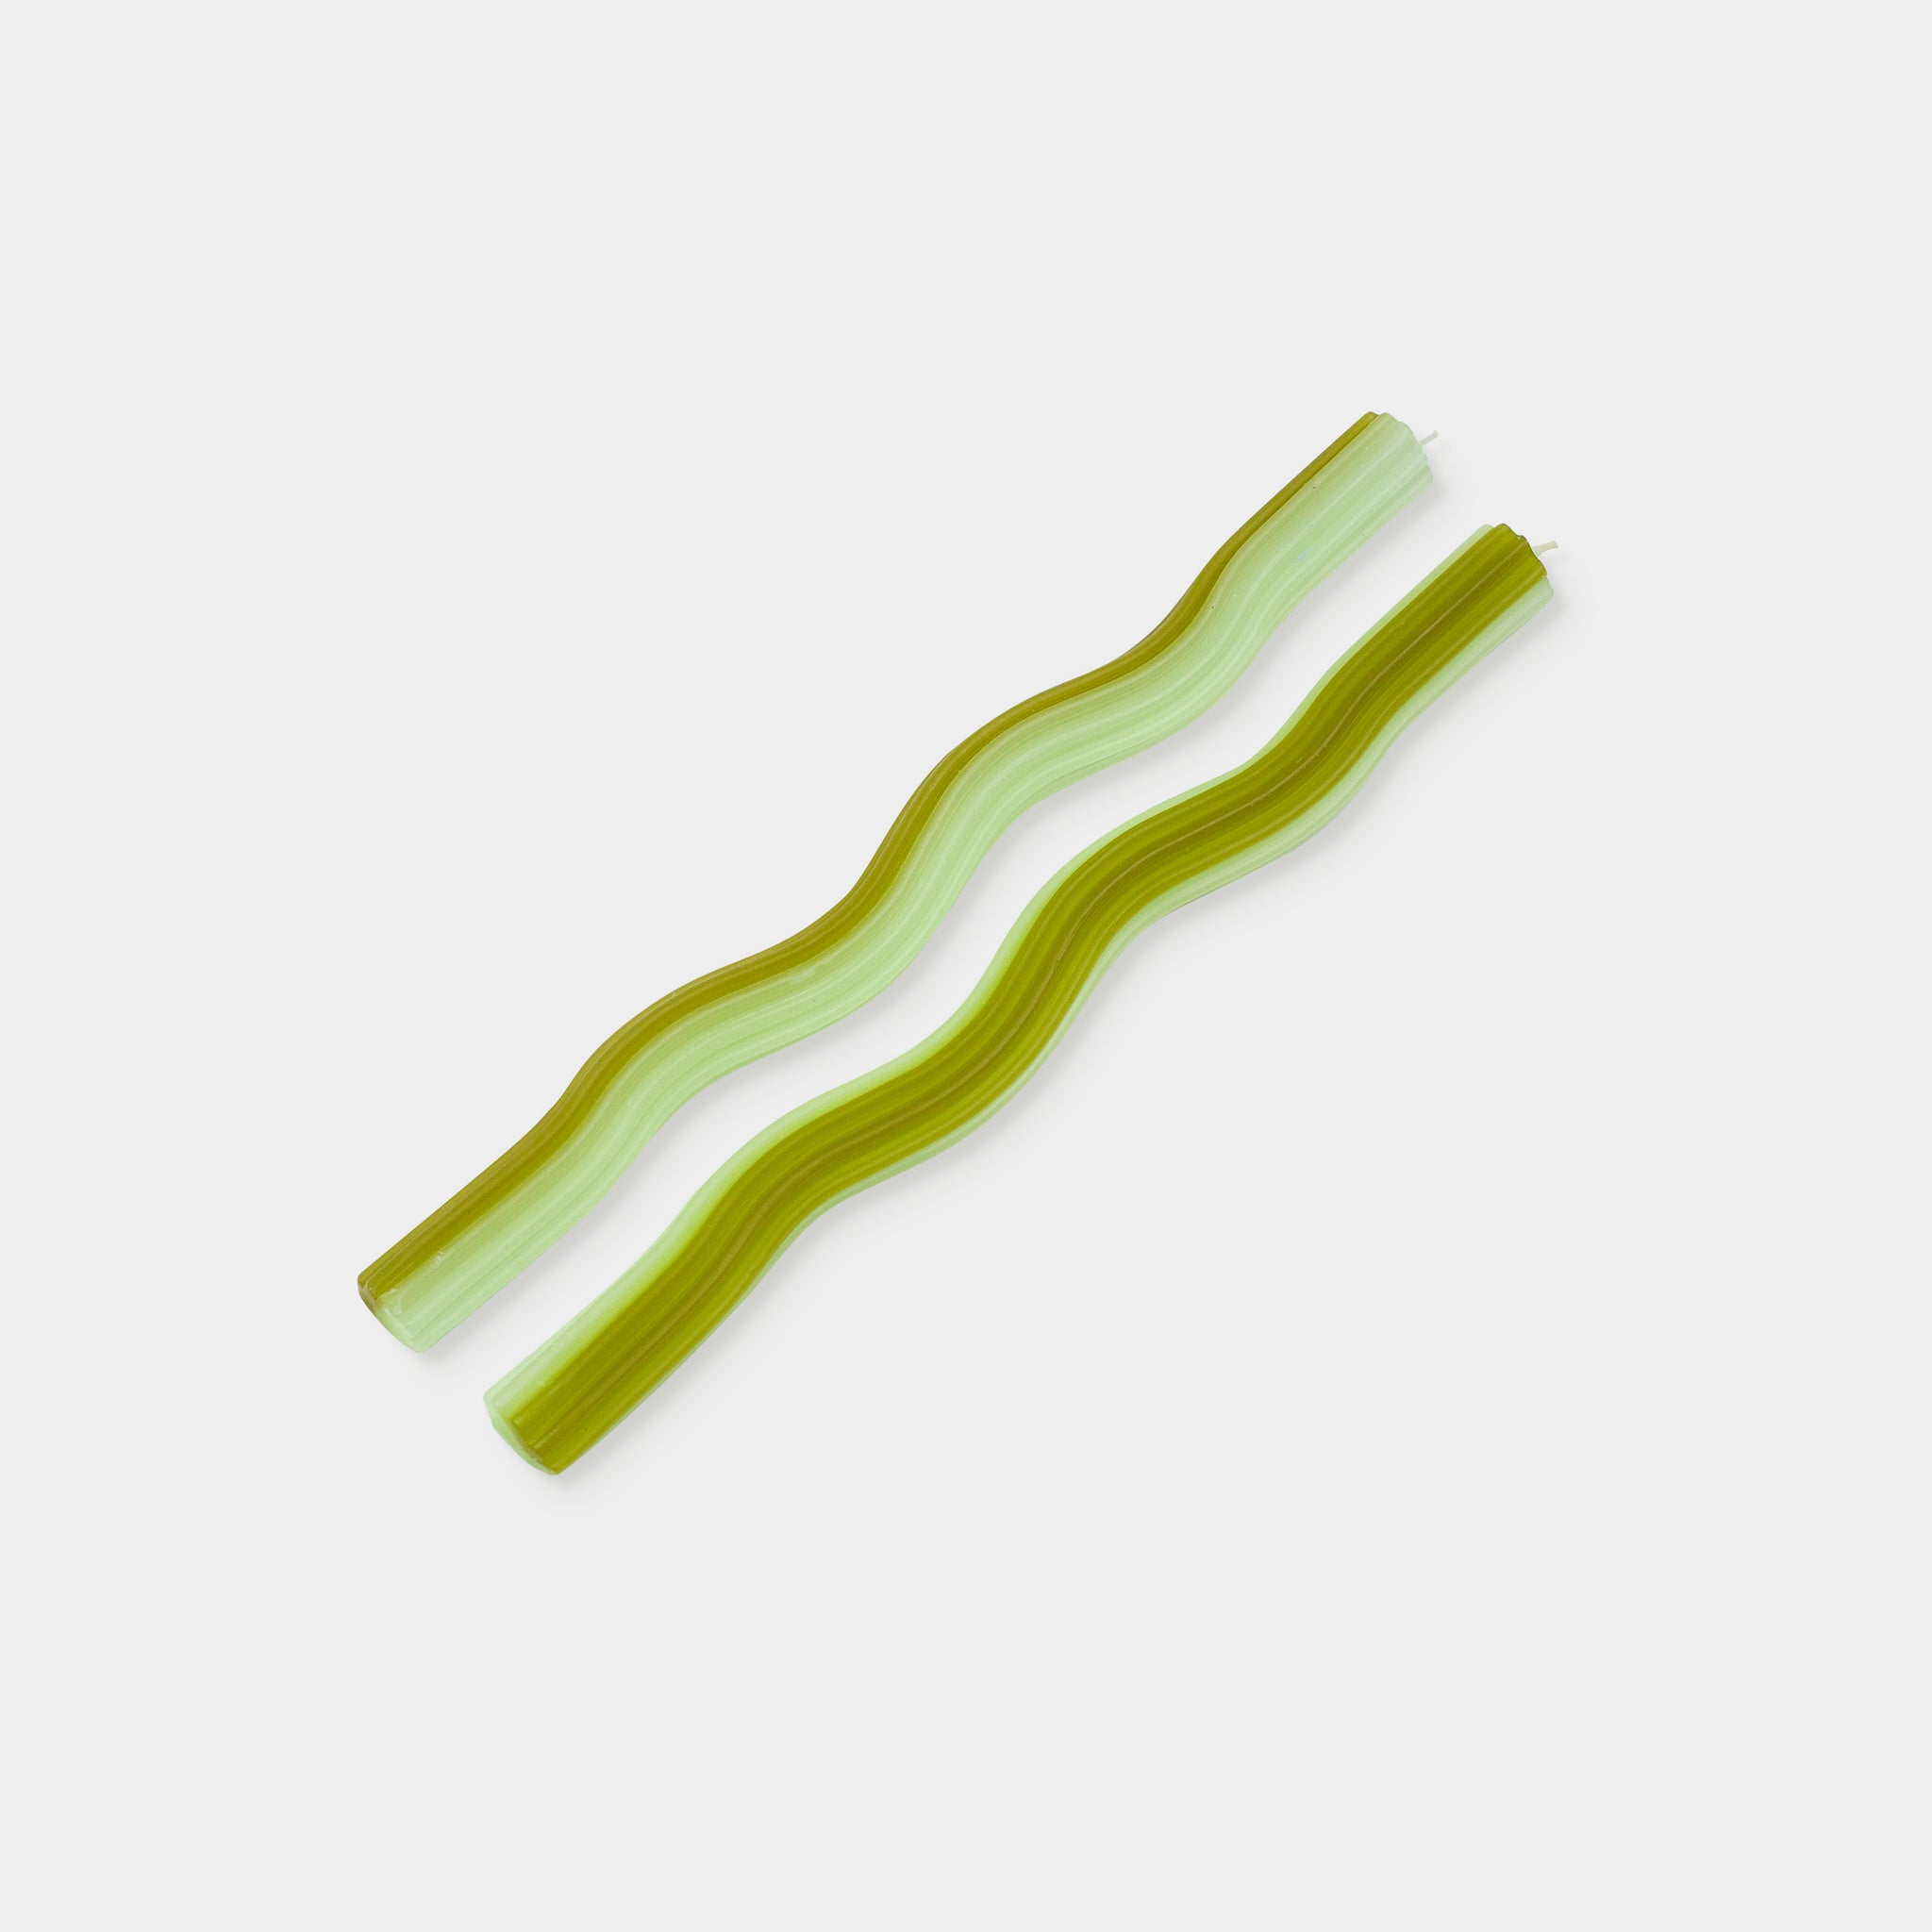 Wiggle Candles - Green (2 pack)